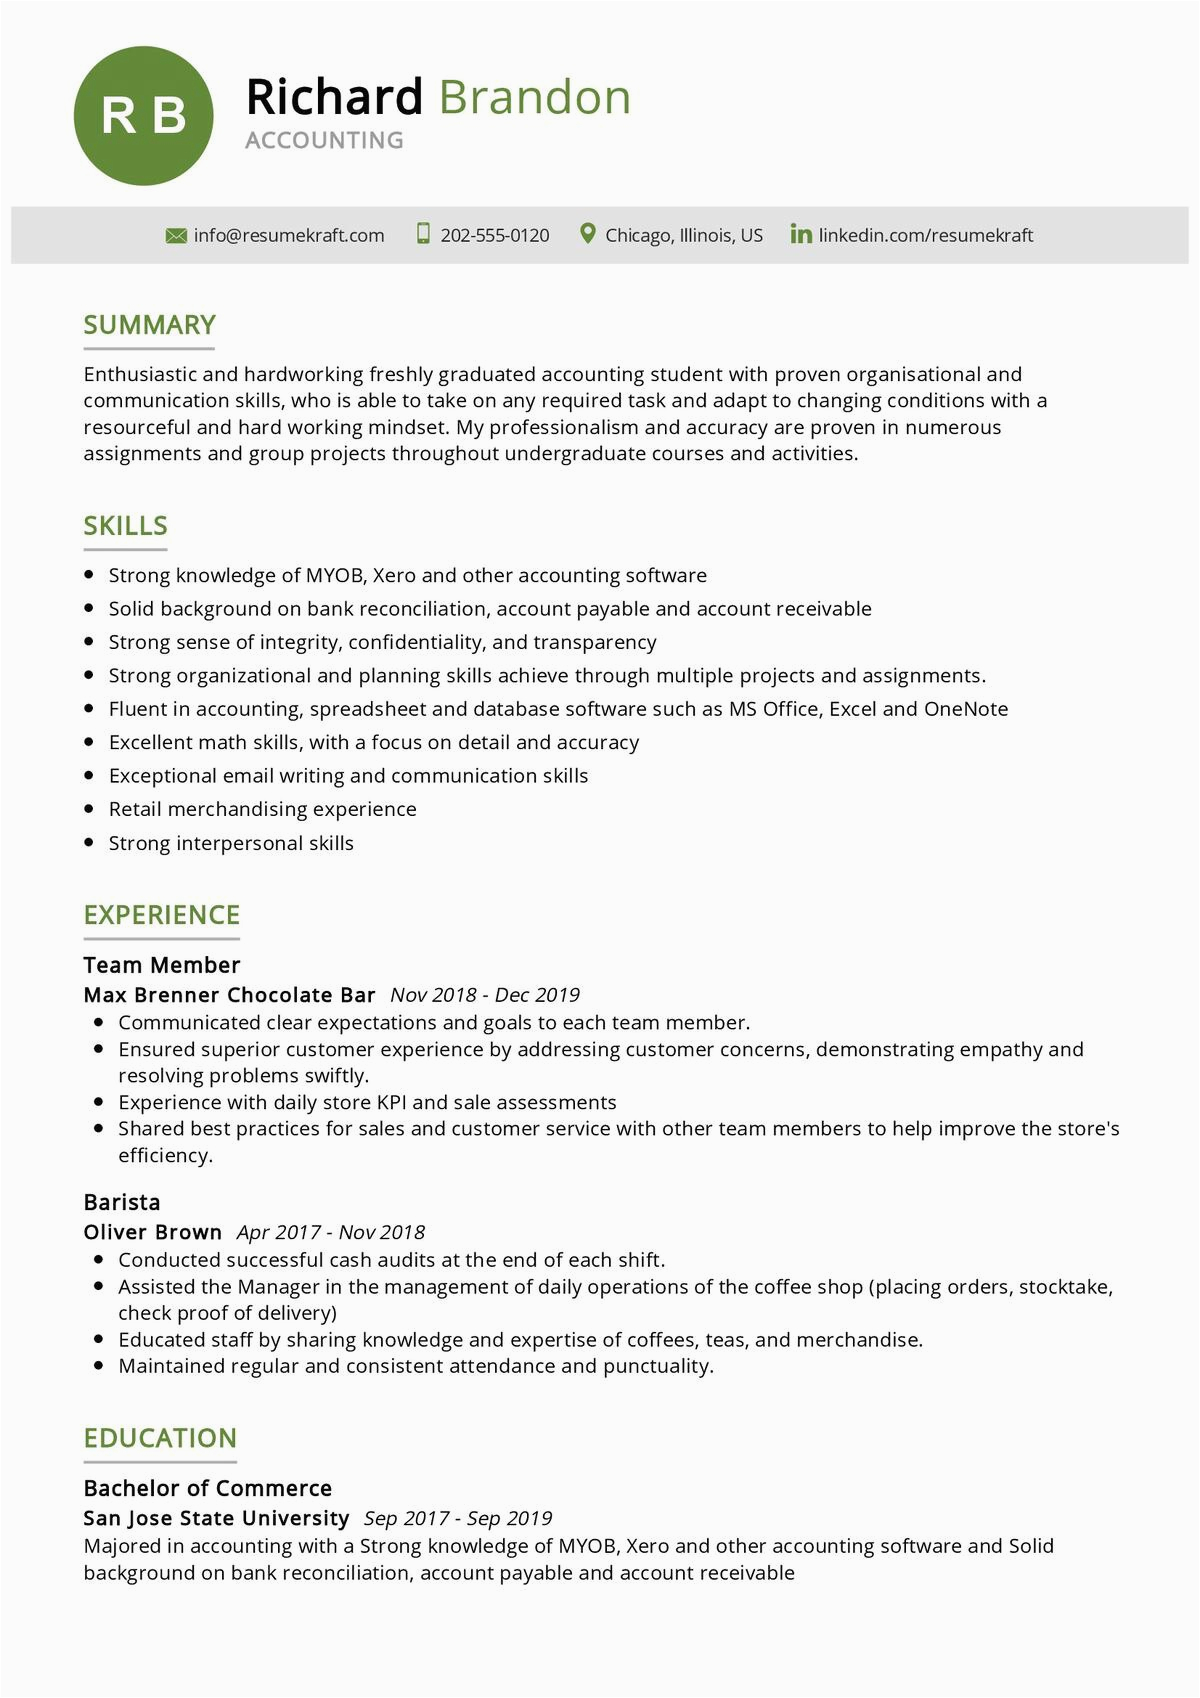 Resume Templates for Accounting and Finance Accounting Finance Resume Samples 2021 Resumekraft